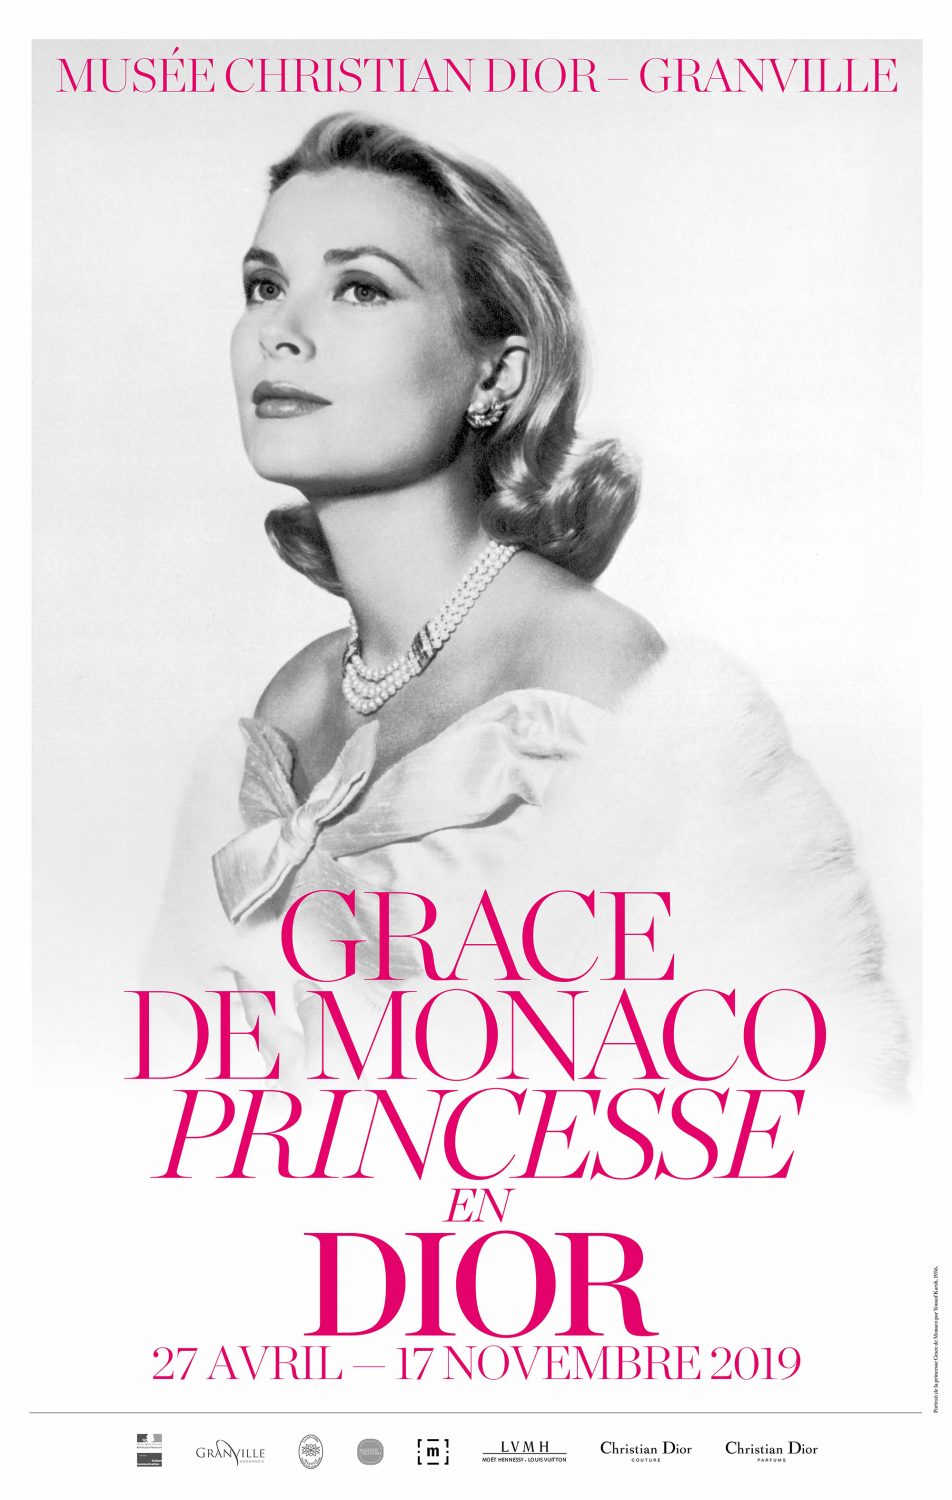 Grace Kelly honored at Christian Dior museum in Normandy, France